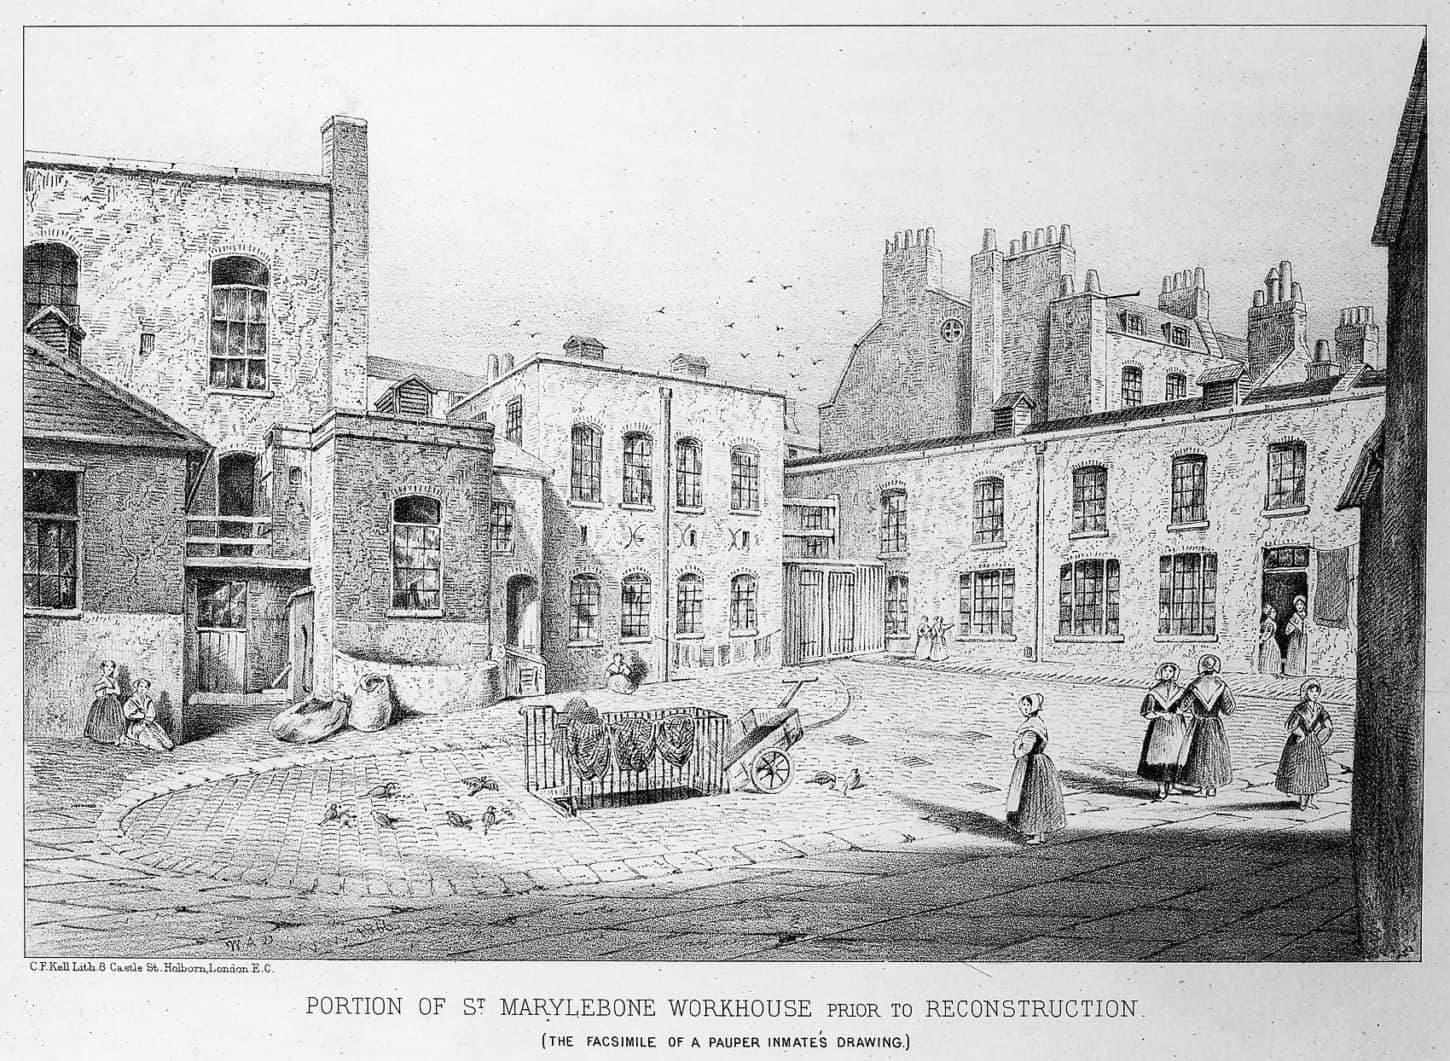 Part of St. Marylebone Workhouse prior to reconstruction. From a drawing by a pauper inmate in 1866, initials W.A.D., published 1881.